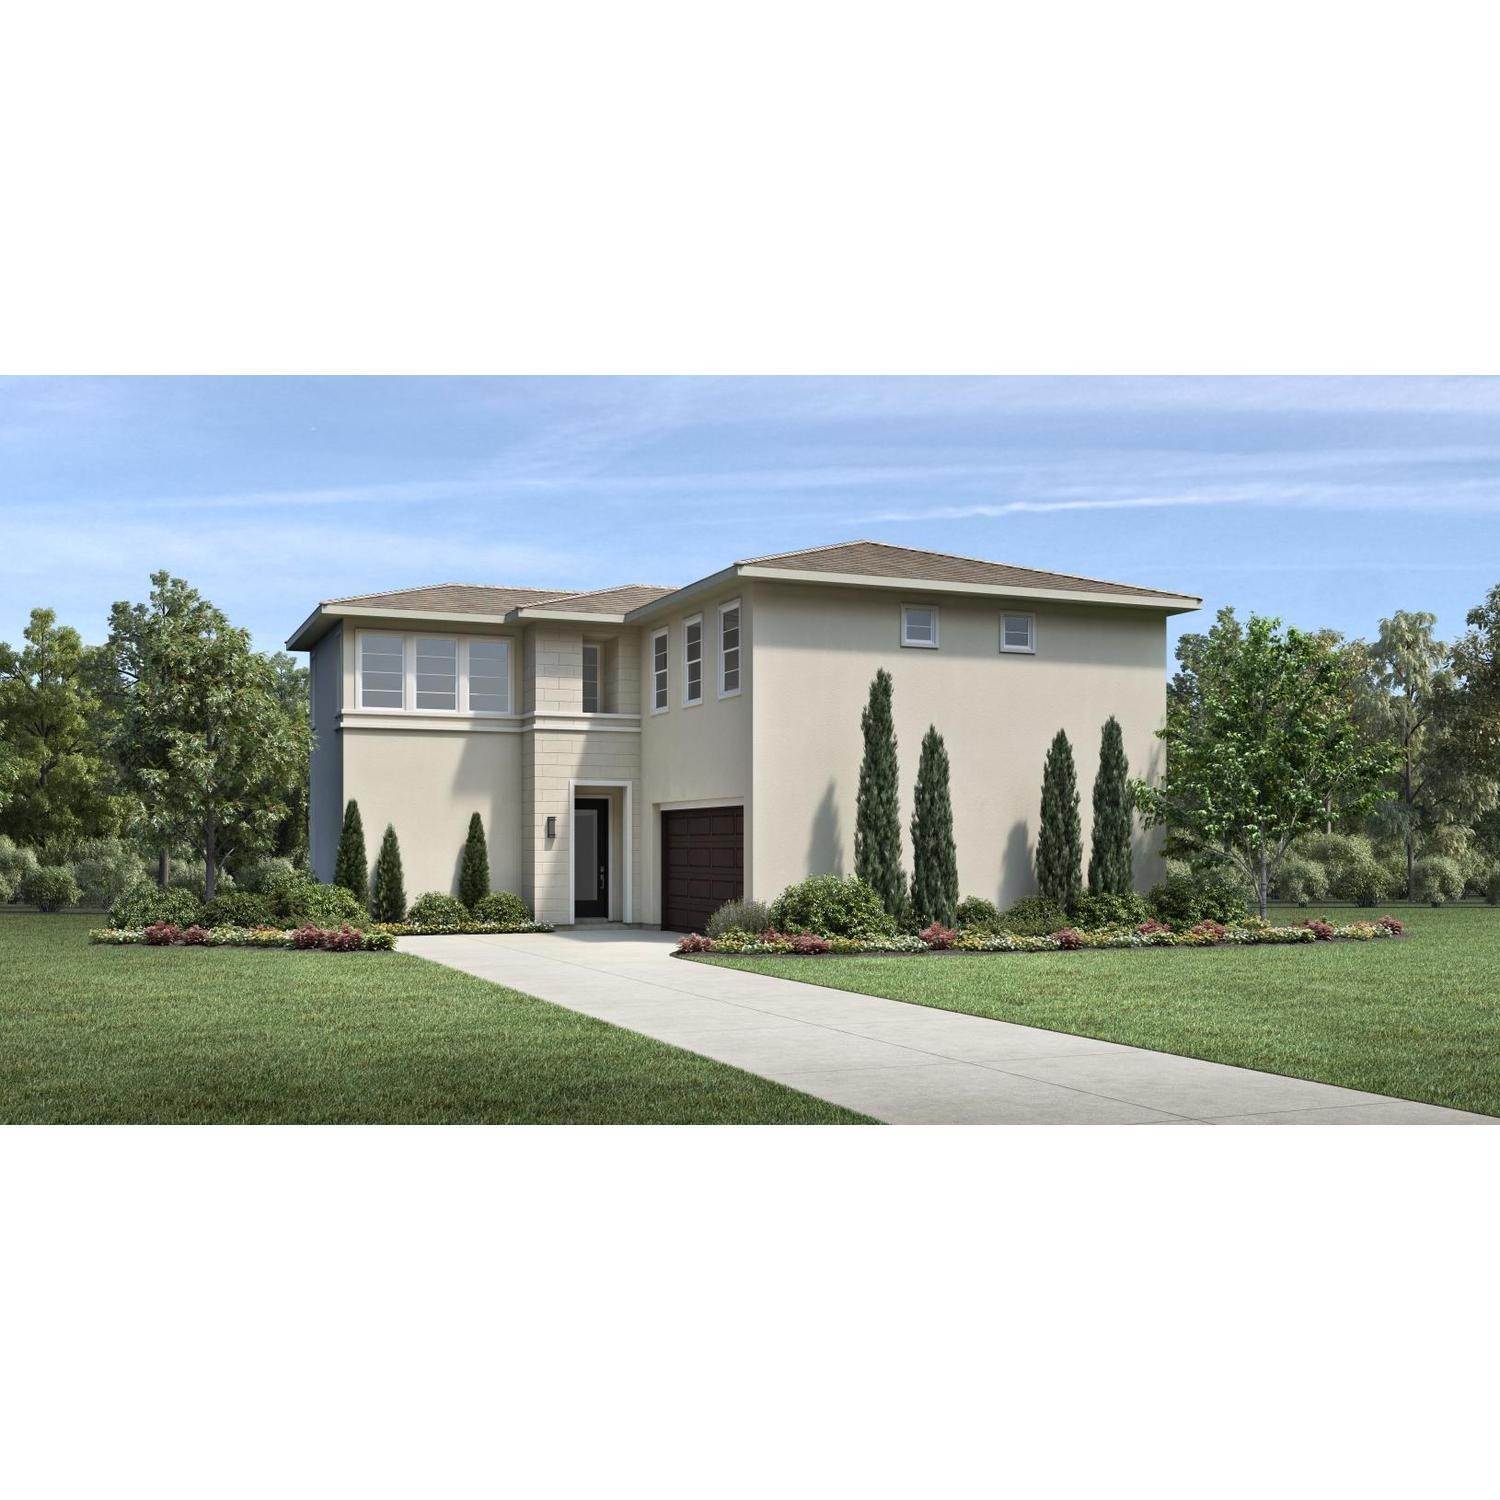 Single Family for Sale at The Willows At The Meadows - Birch 201 Lassen St LAKE FOREST, CALIFORNIA 92630 UNITED STATES